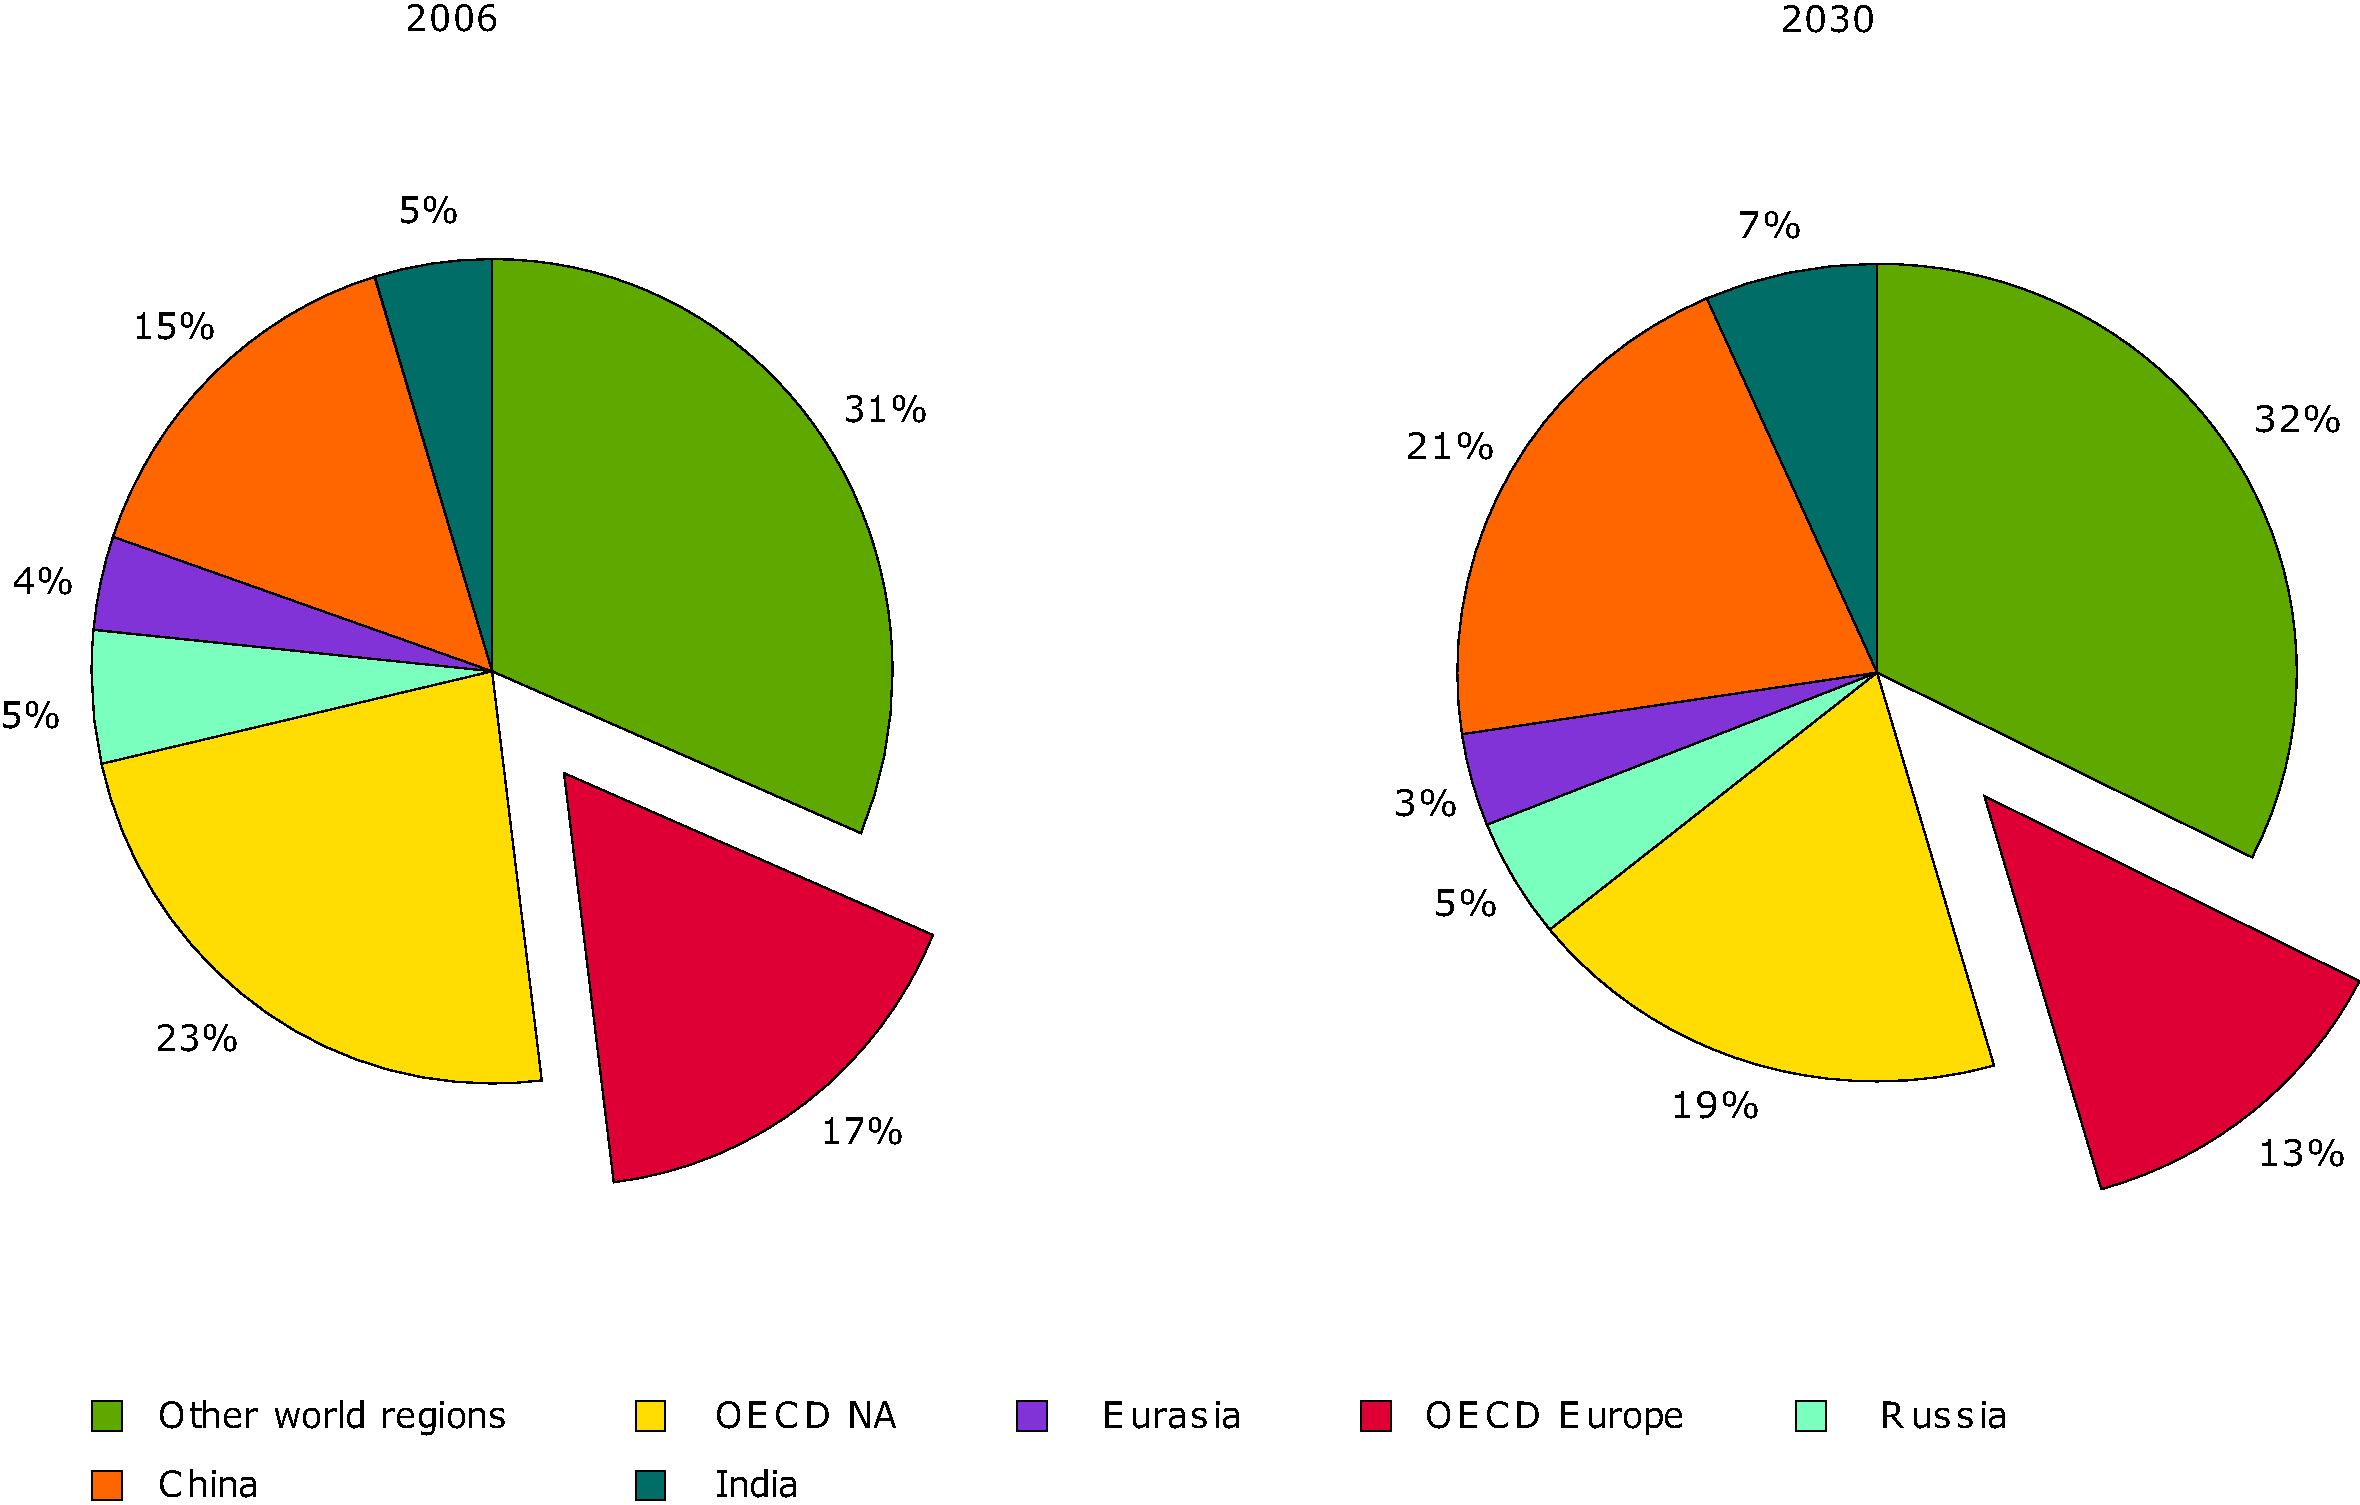 Regional shares in global final energy demand in 2006 and 2030